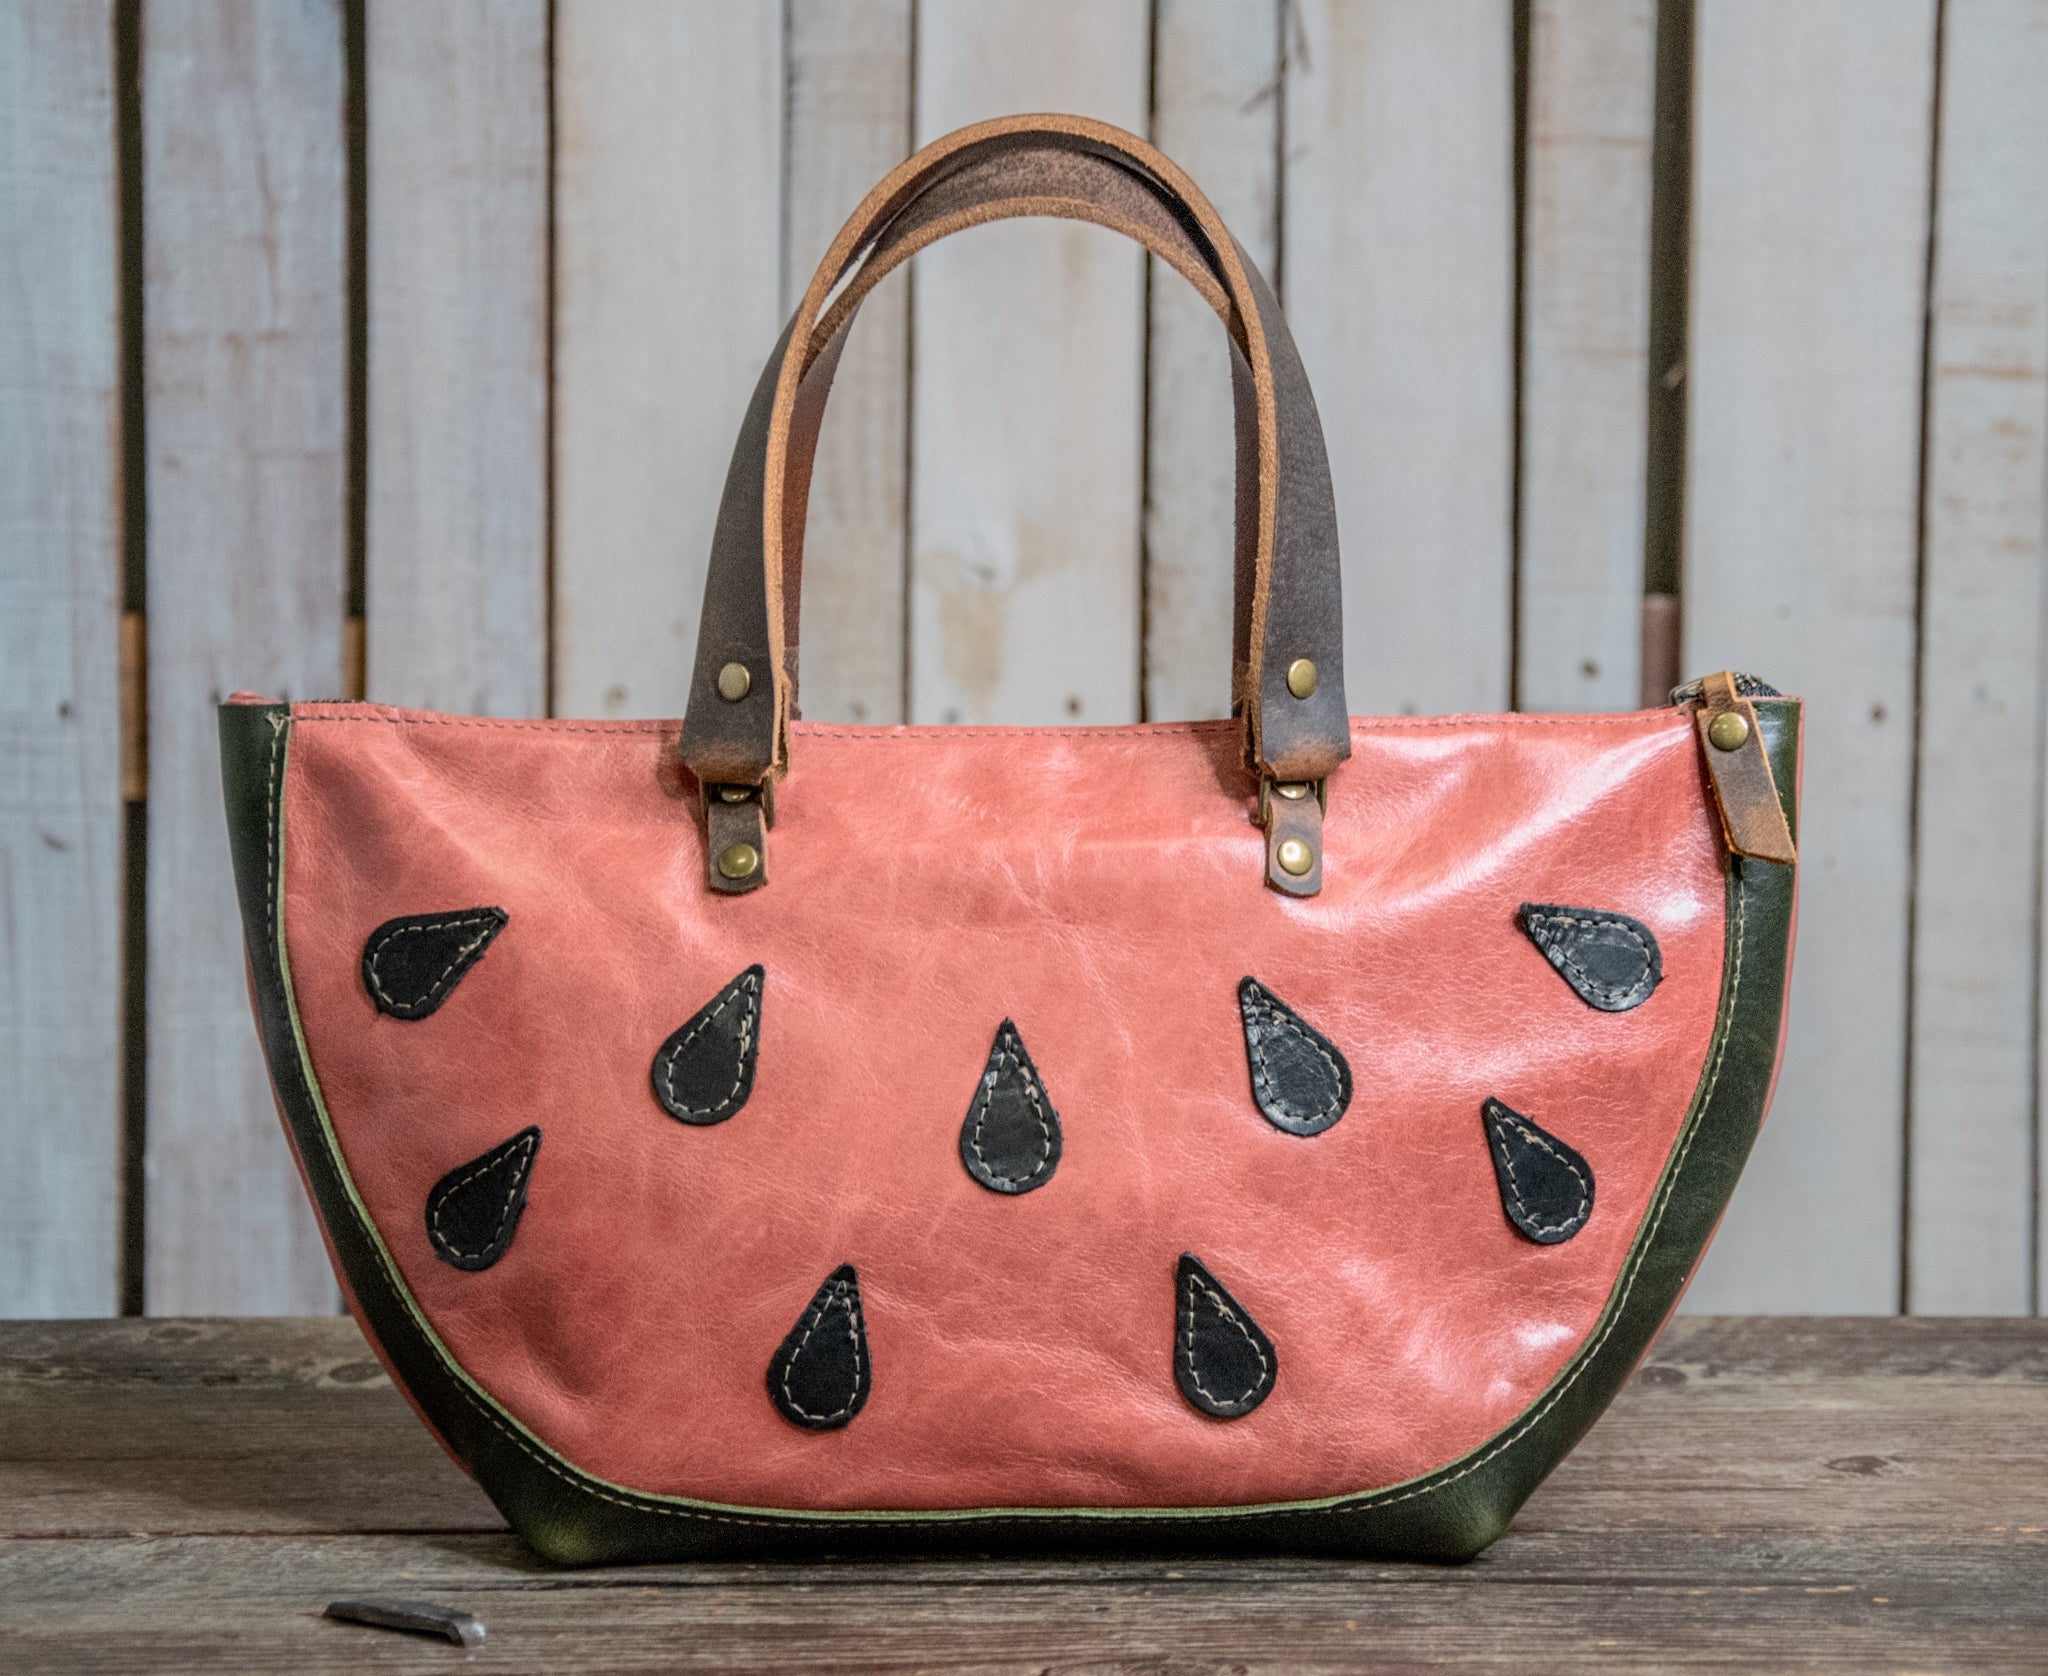 LIMITED | ONLY 5 AVAILABLE | Handmade Leather Tote Bag | SMALL Bowler | THE Nelson and Mando Watermelon Bag!!!